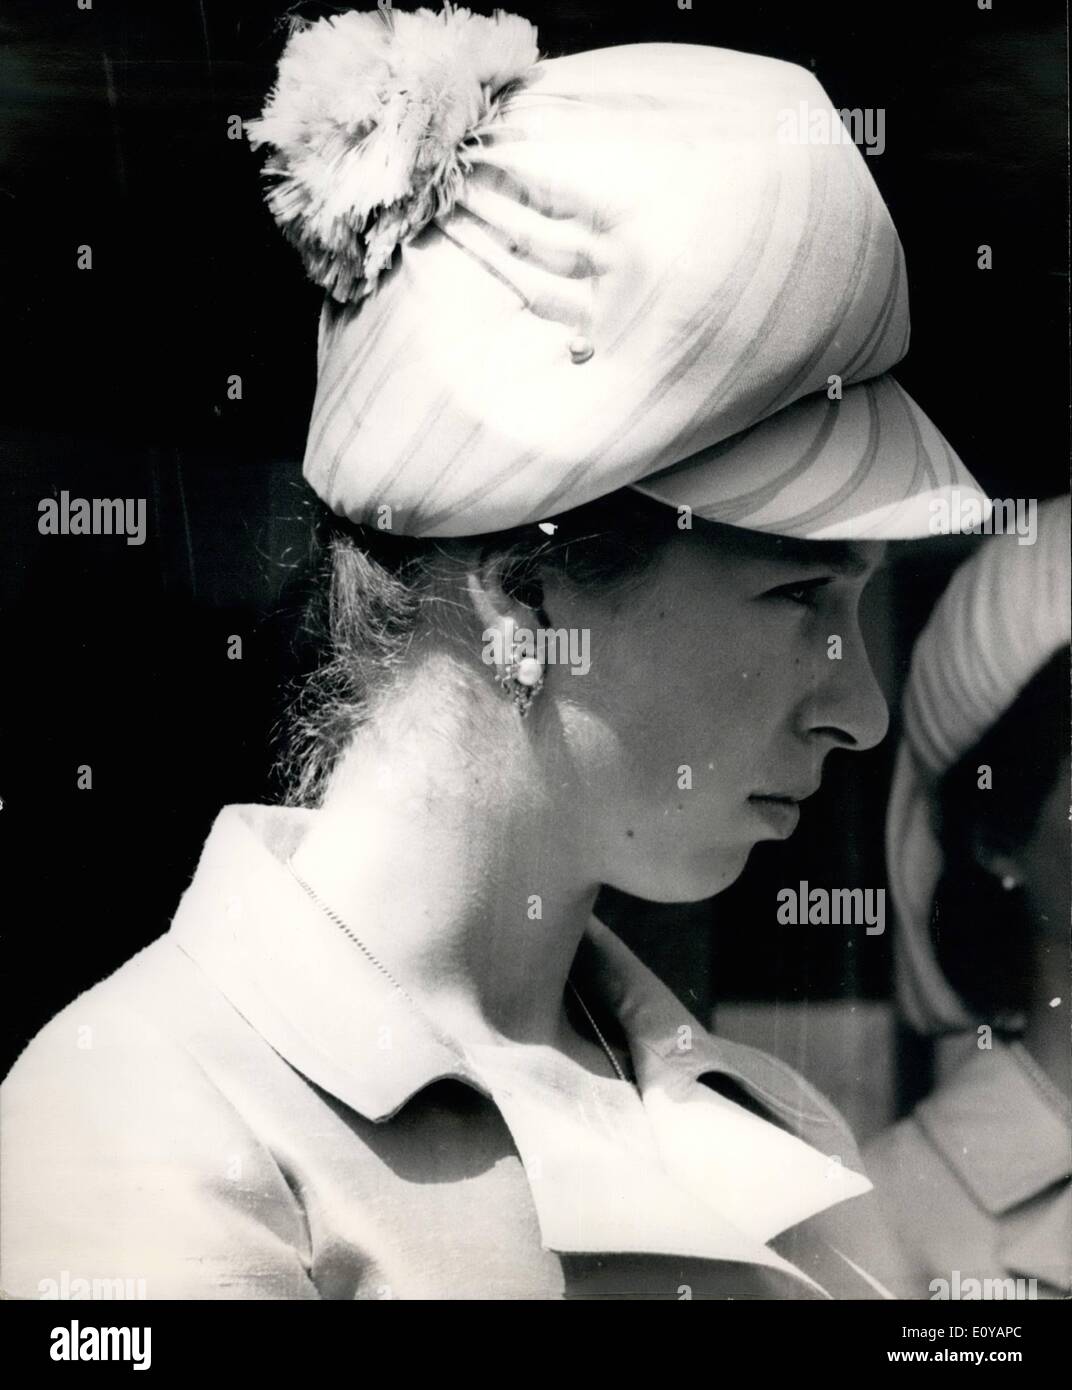 Jul. 07, 1969 - Princess Anne opens Small Animals Centre. H.R.M. Princess Anne today opened the new Small Animals Centre, run by the animal health trust - Lanwaden Park, Kennett. near Newmarket. Photo shows:- H.R.M. Princess Anne pictured in a jockey-style hat - during her visit to the Small Animals Centre today. Stock Photo